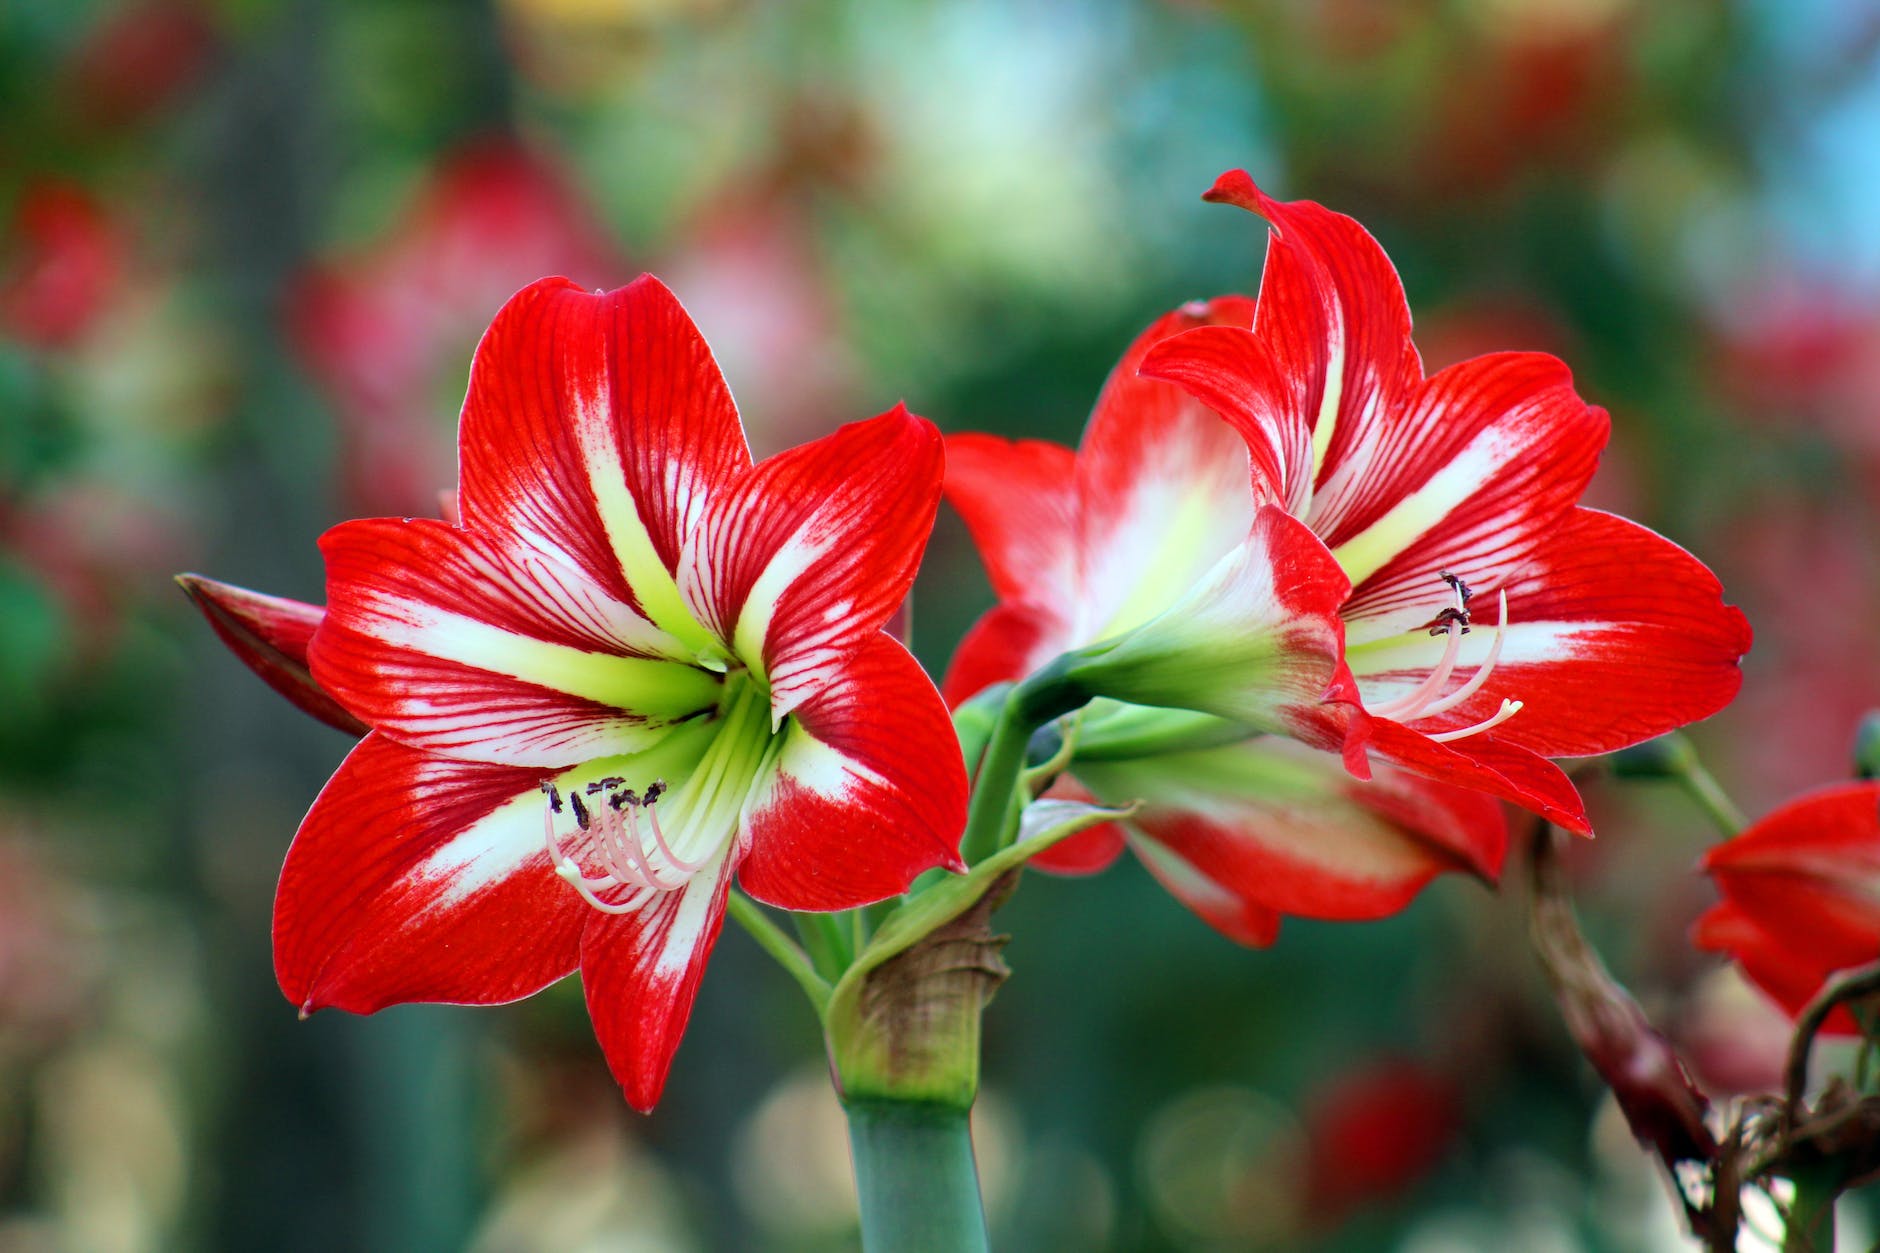 bokeh photo of white and red flowers